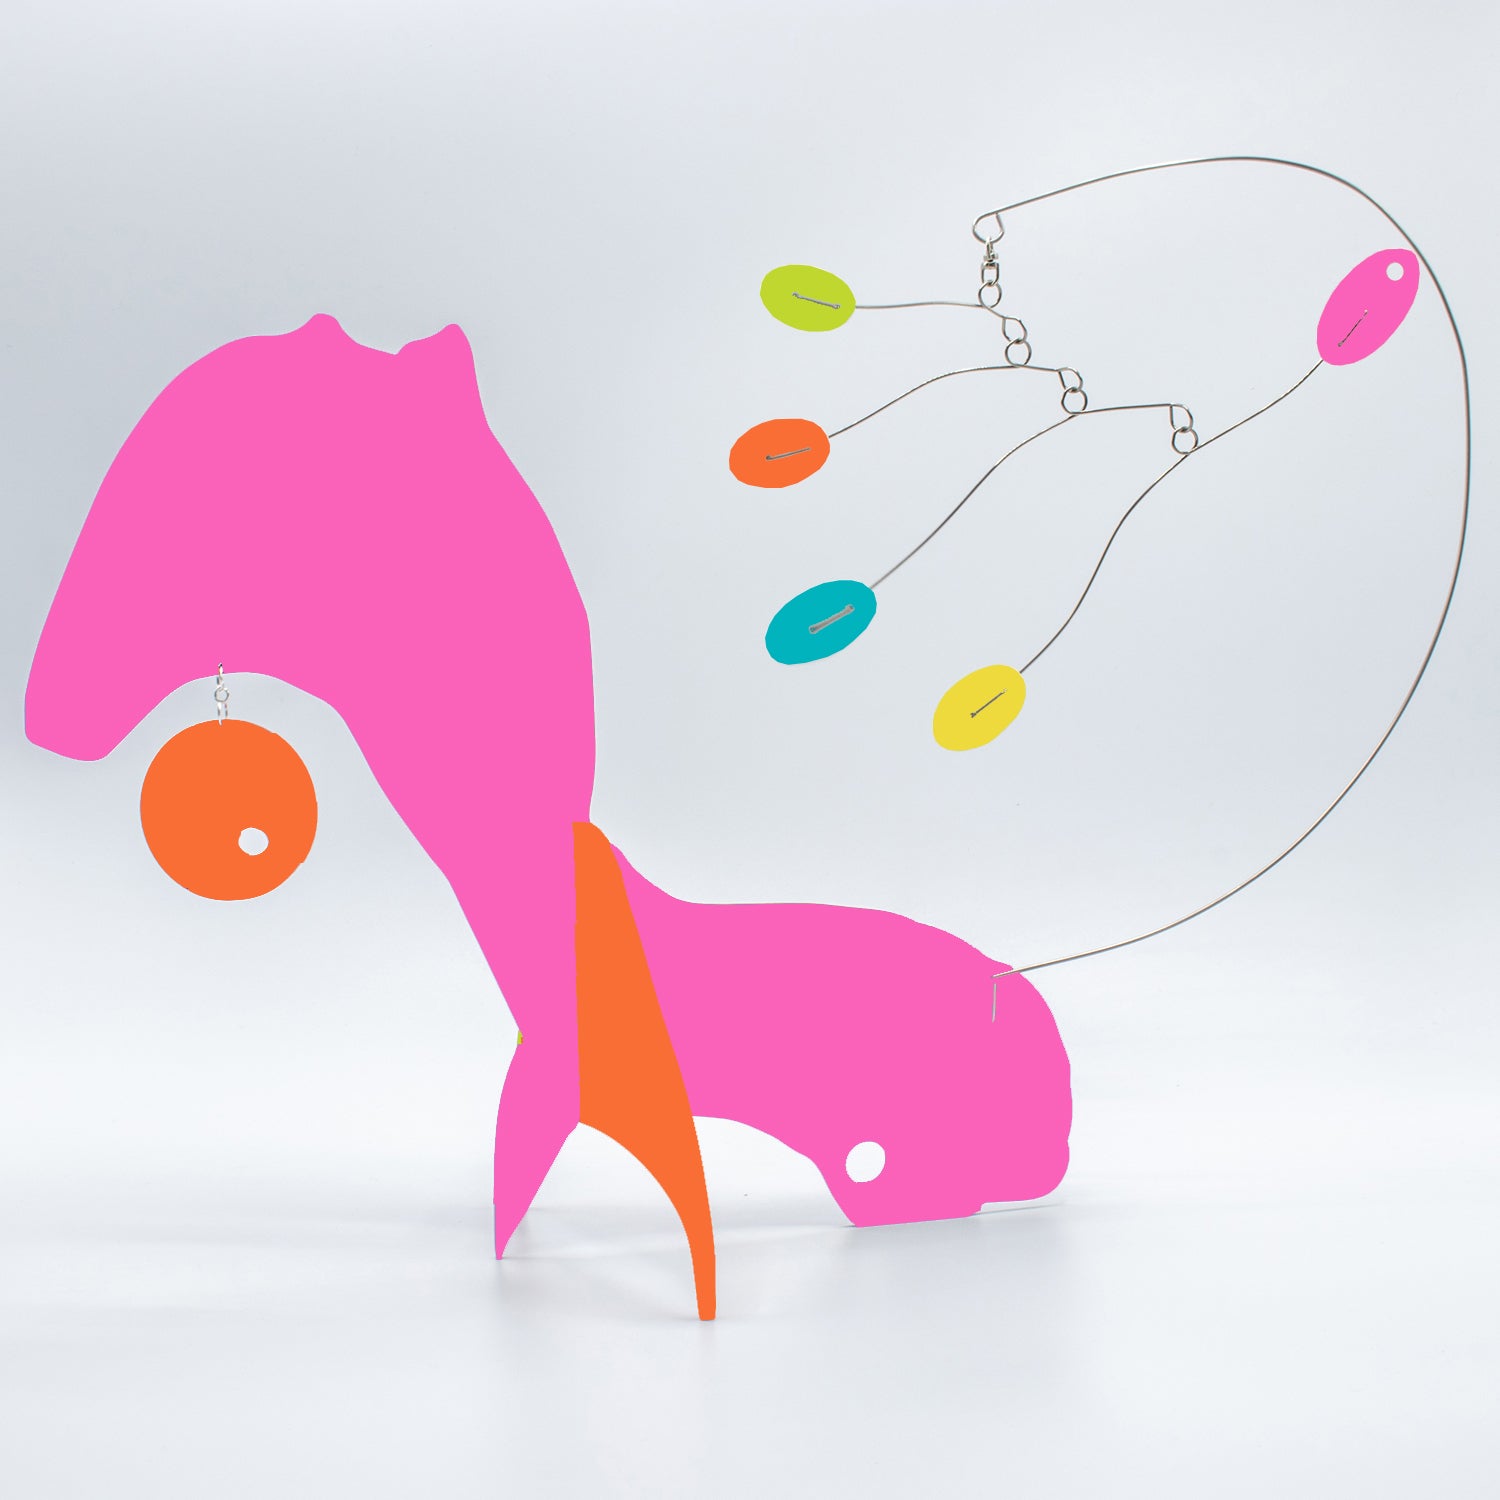 KinetiCats Collection Fox in Hot Pink, Orange, Aqua, Lime Green, and Yellow - one of 12 Modern Cute Abstract Animal Art Sculpture Kinetic Stabiles inspired by Dada and mid century modern style art by AtomicMobiles.com